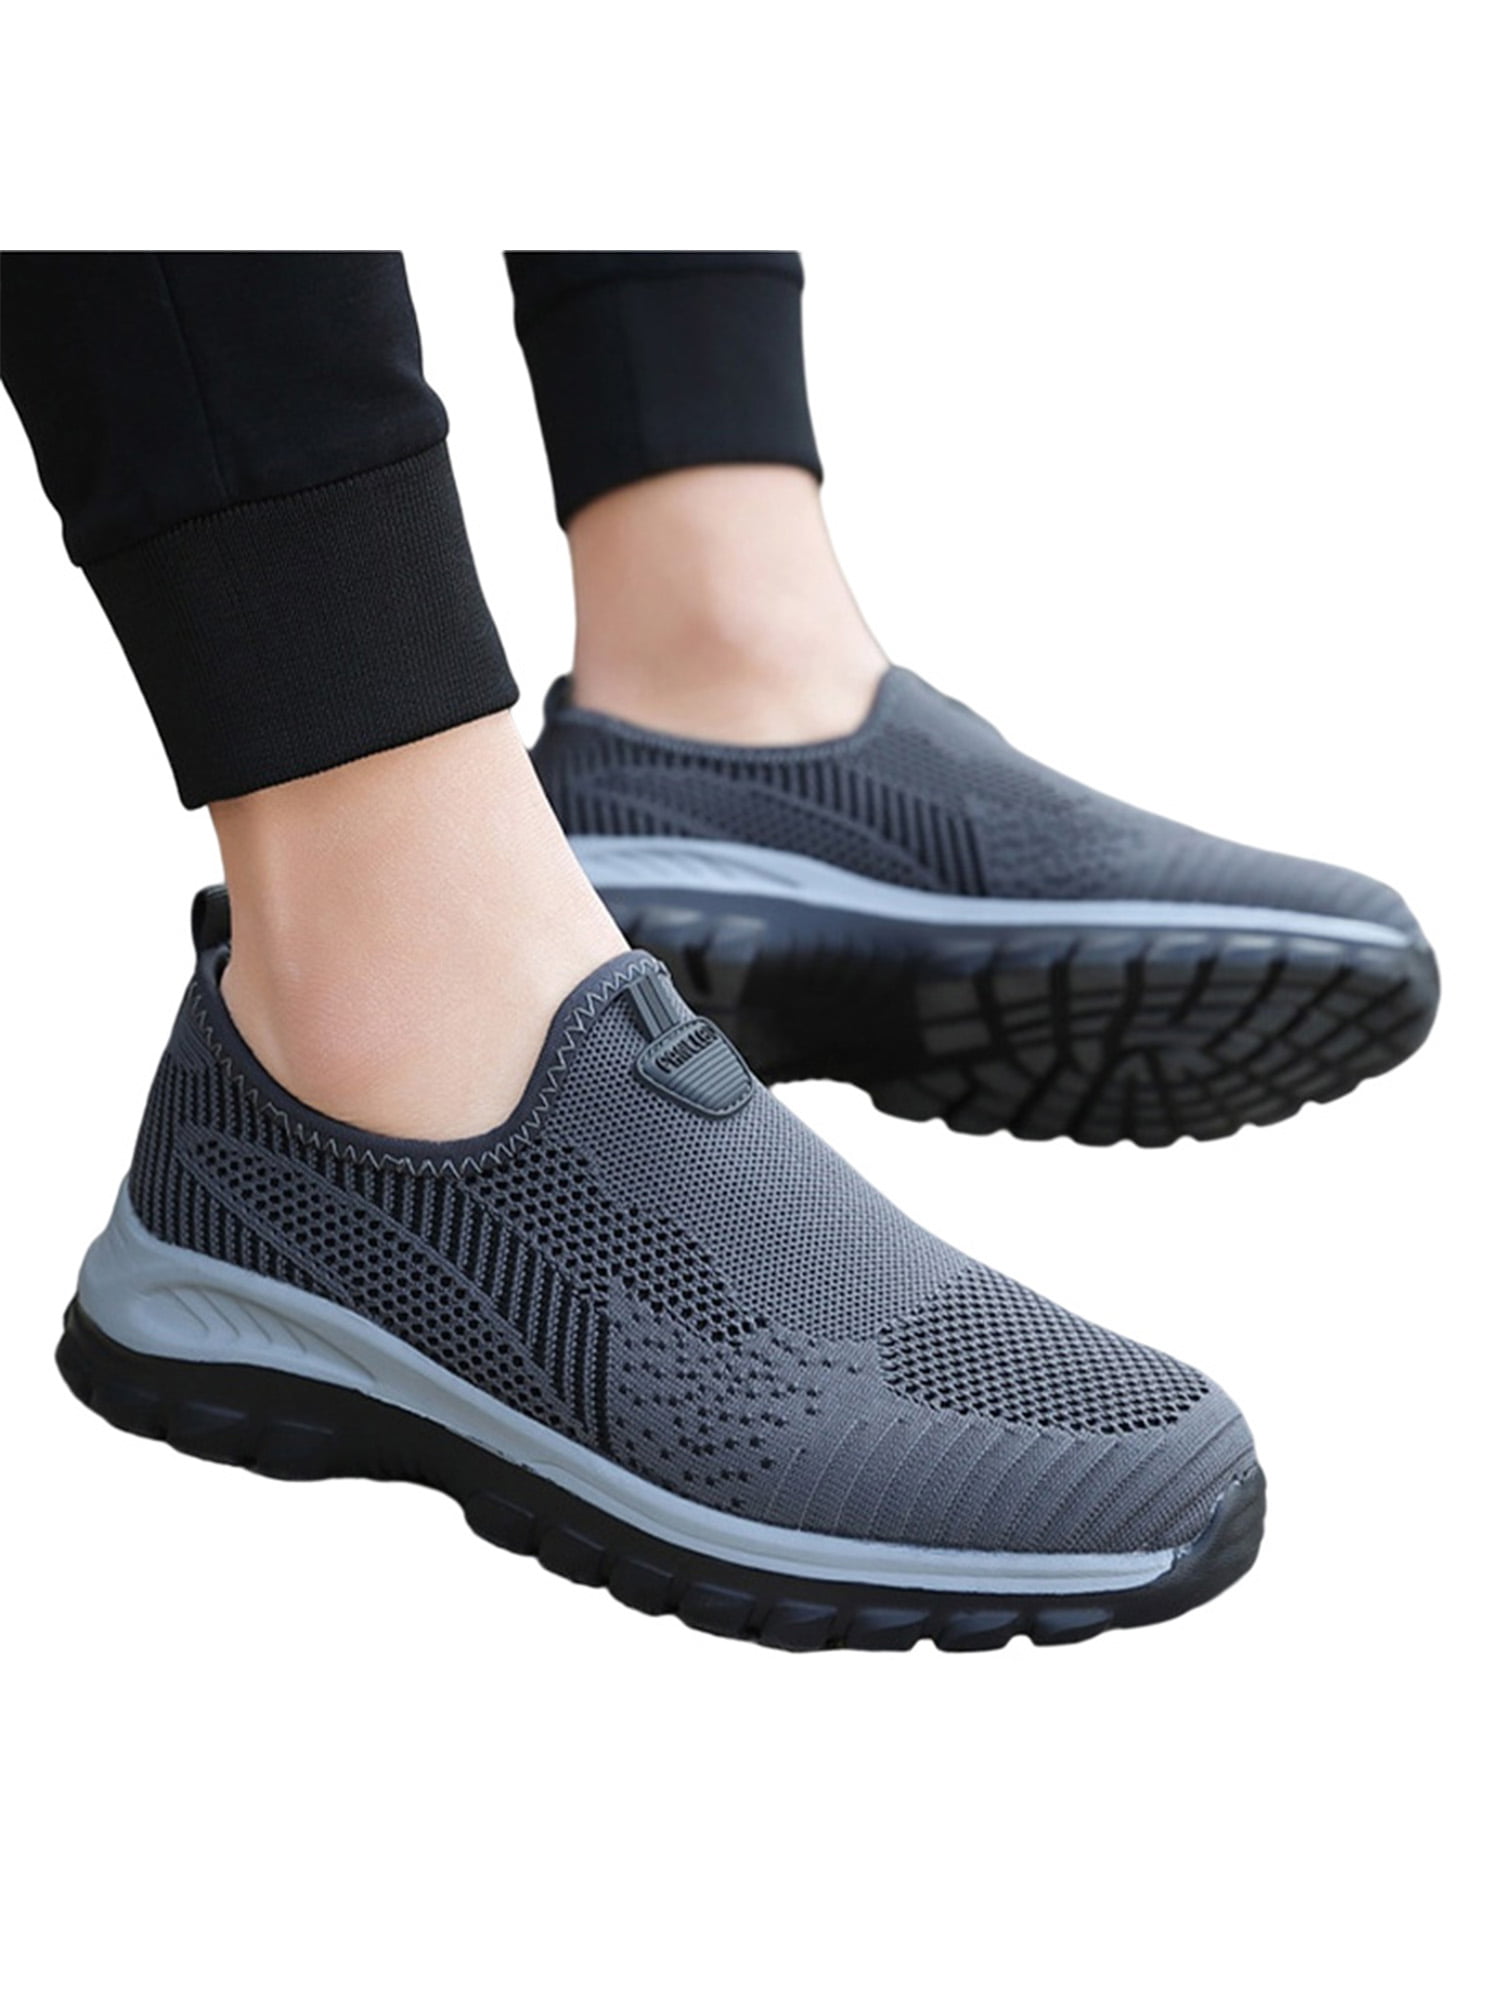 MREIO I need space Childrens Lightweight Fly Knit Shoes Casual Sport Loafers Sneakers Gym Shoes For Boys 